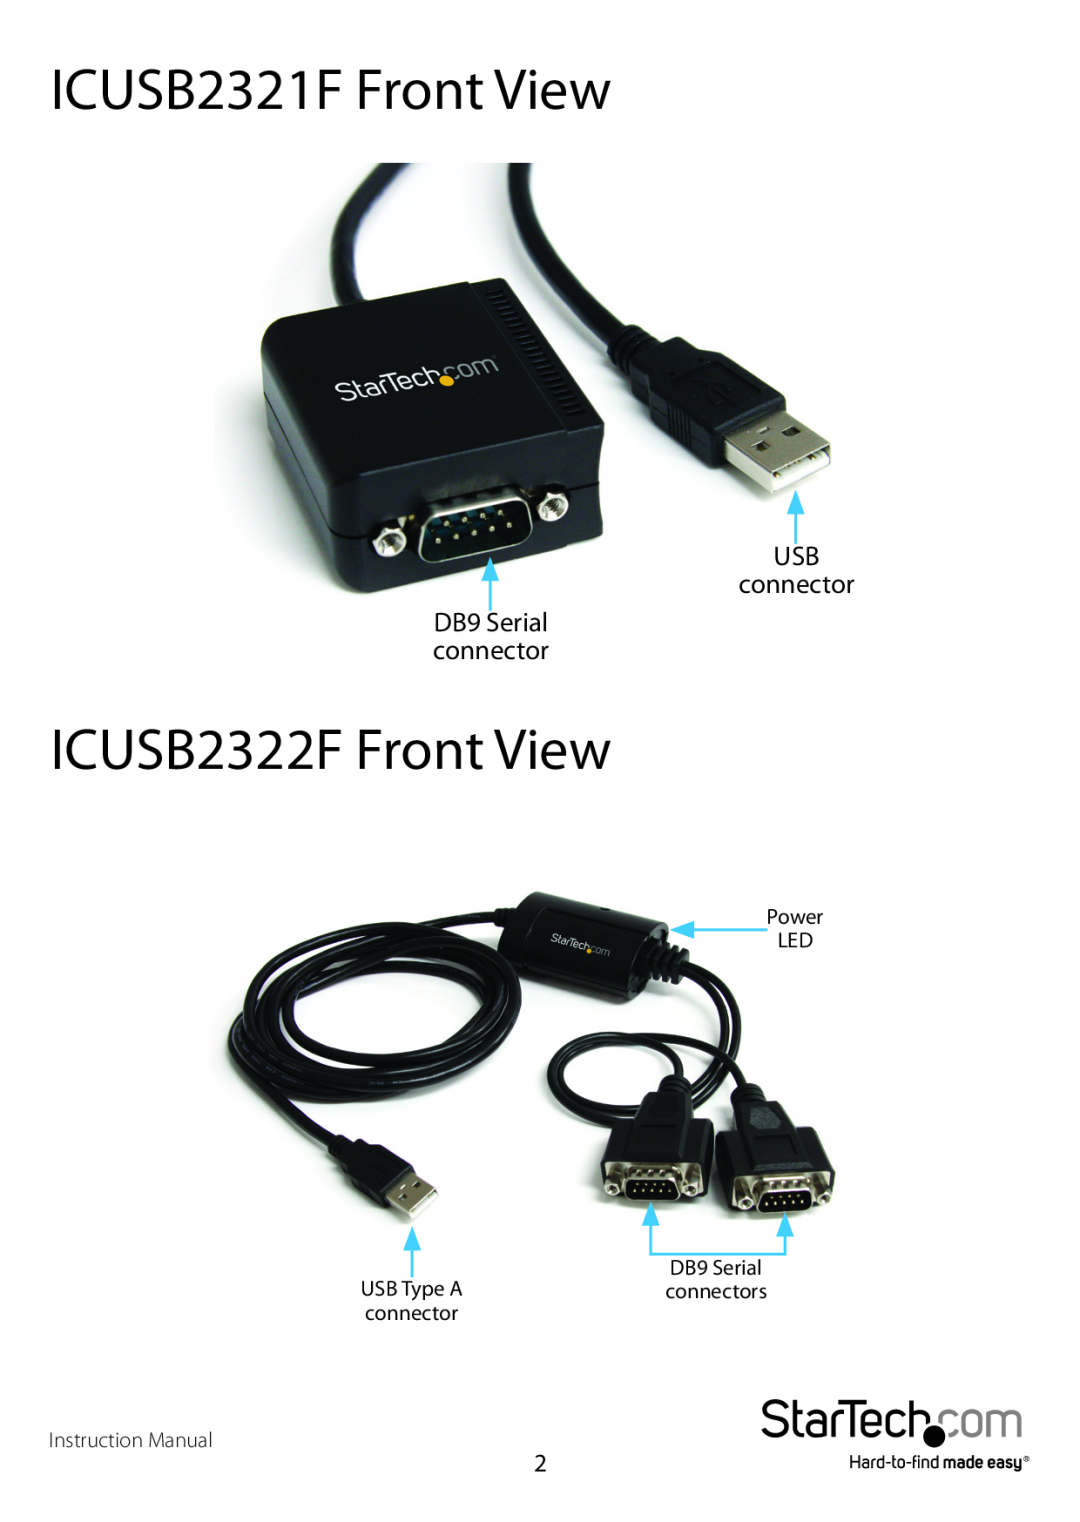 StarTech.com icusb2321f manual ICUSB2321F Front View, ICUSB2322F Front View, USB connector 